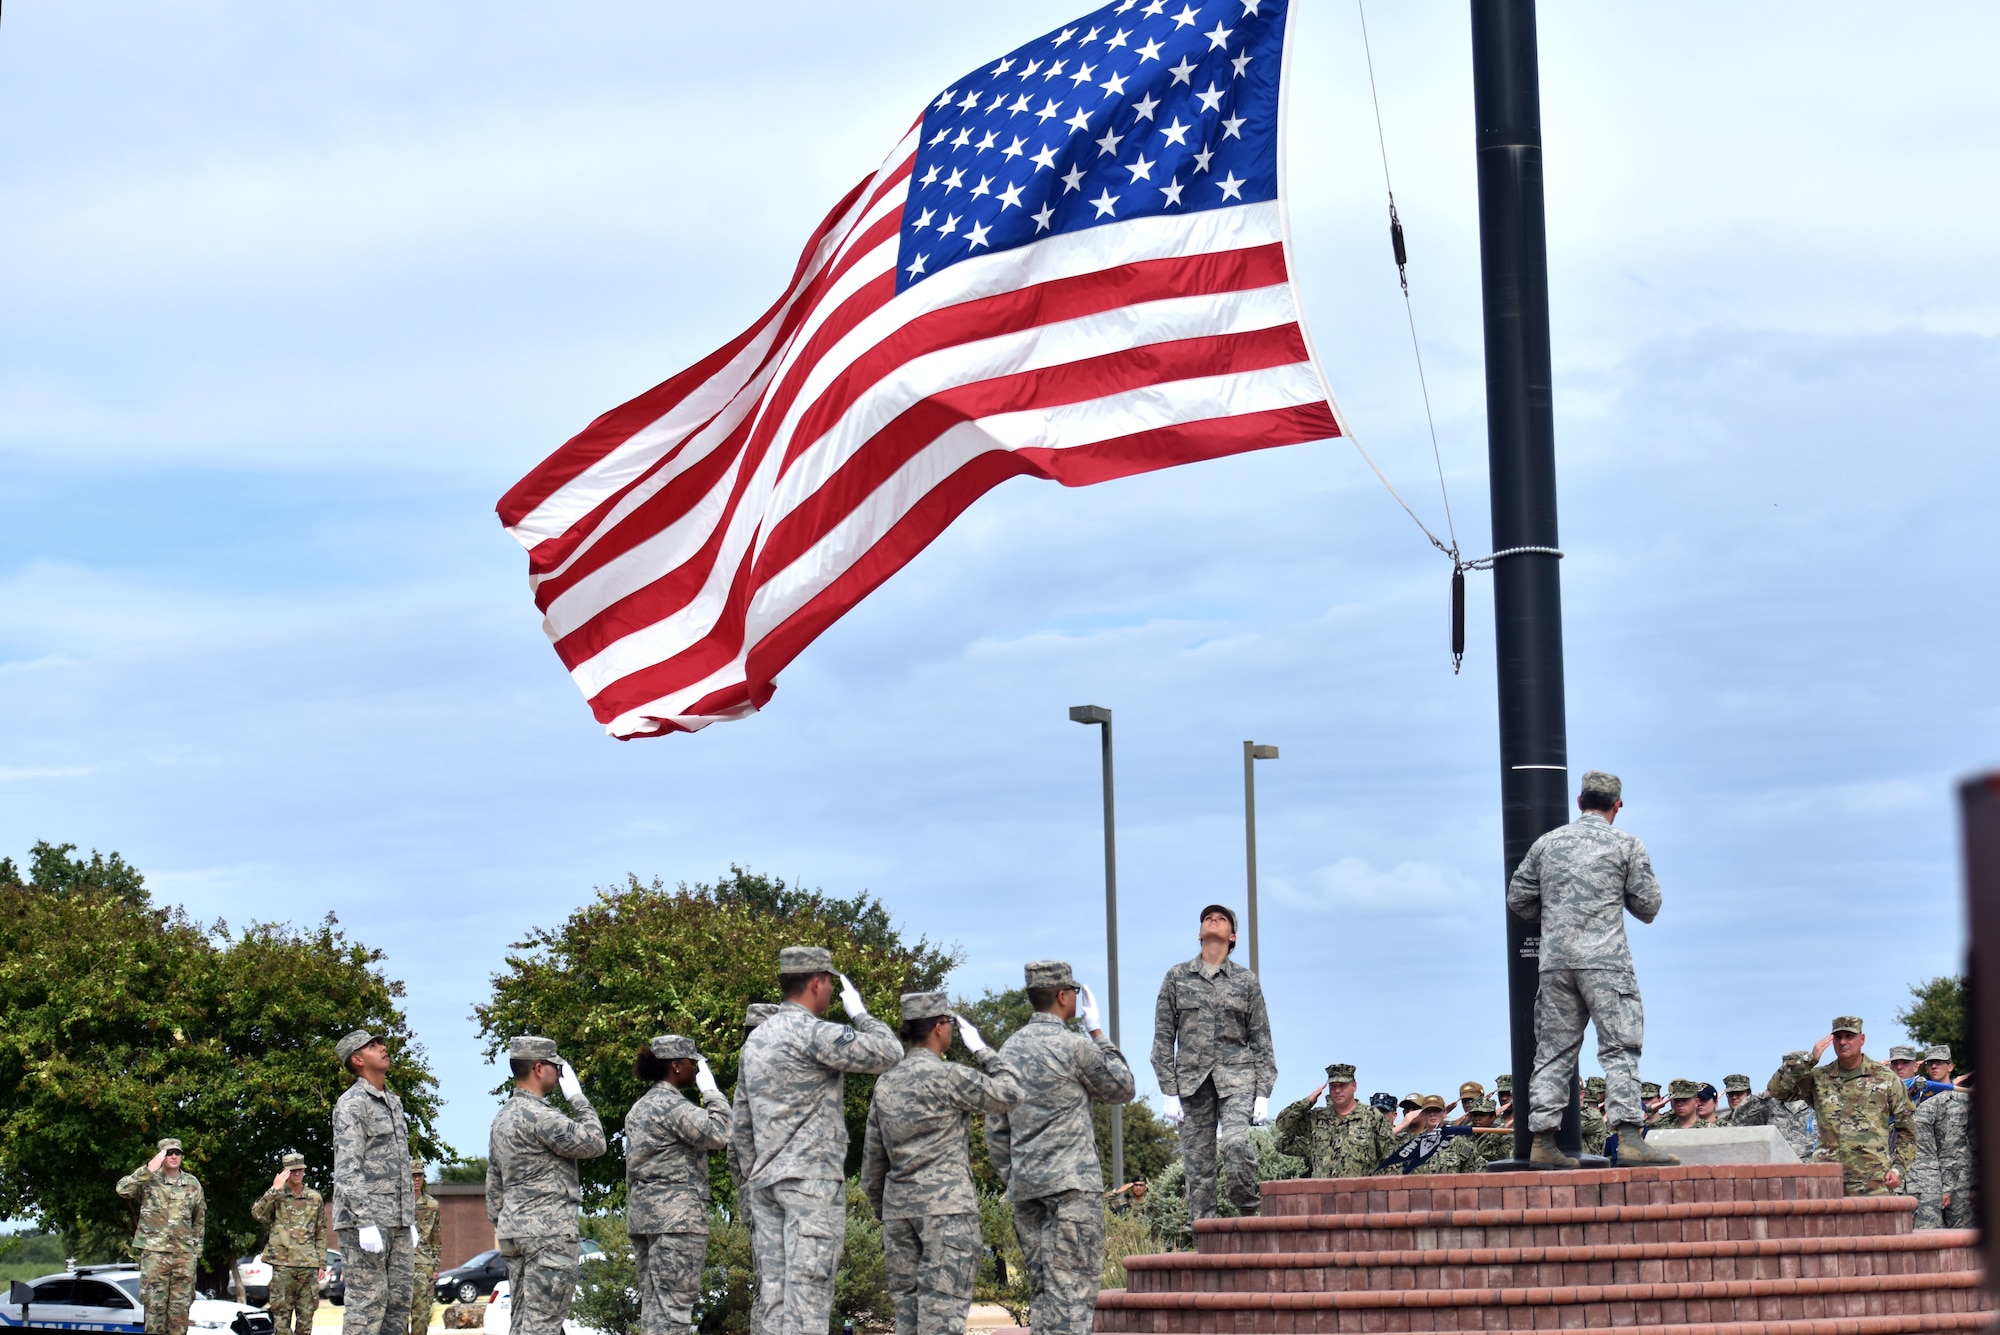 Members of the Goodfellow Honor Guard lower the wing flag during a special retreat ceremony outside of the Norma Brown building on Goodfellow Air Force Base, Texas, Sept. 11, 2019. The retreat ceremony was held to honor those who gave the ultimate sacrifice during the events of 9/11. (U.S. Air Force photo by Senior Airman Seraiah Wolf/Released)